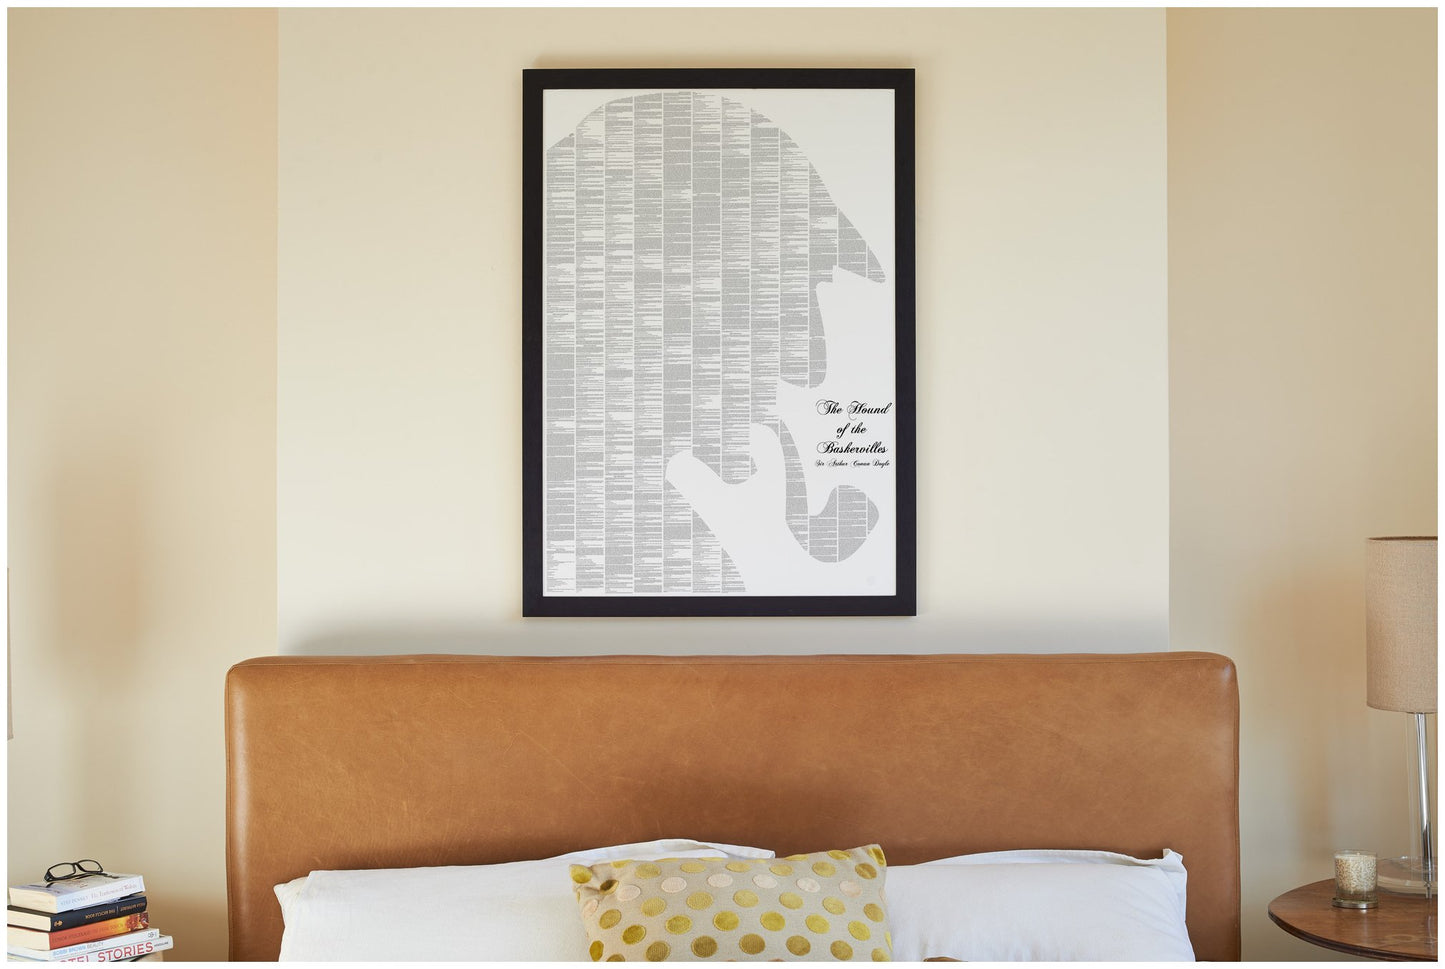 Spineless Classics - The Hound Of The Baskervilles Sherlock Holmes Print